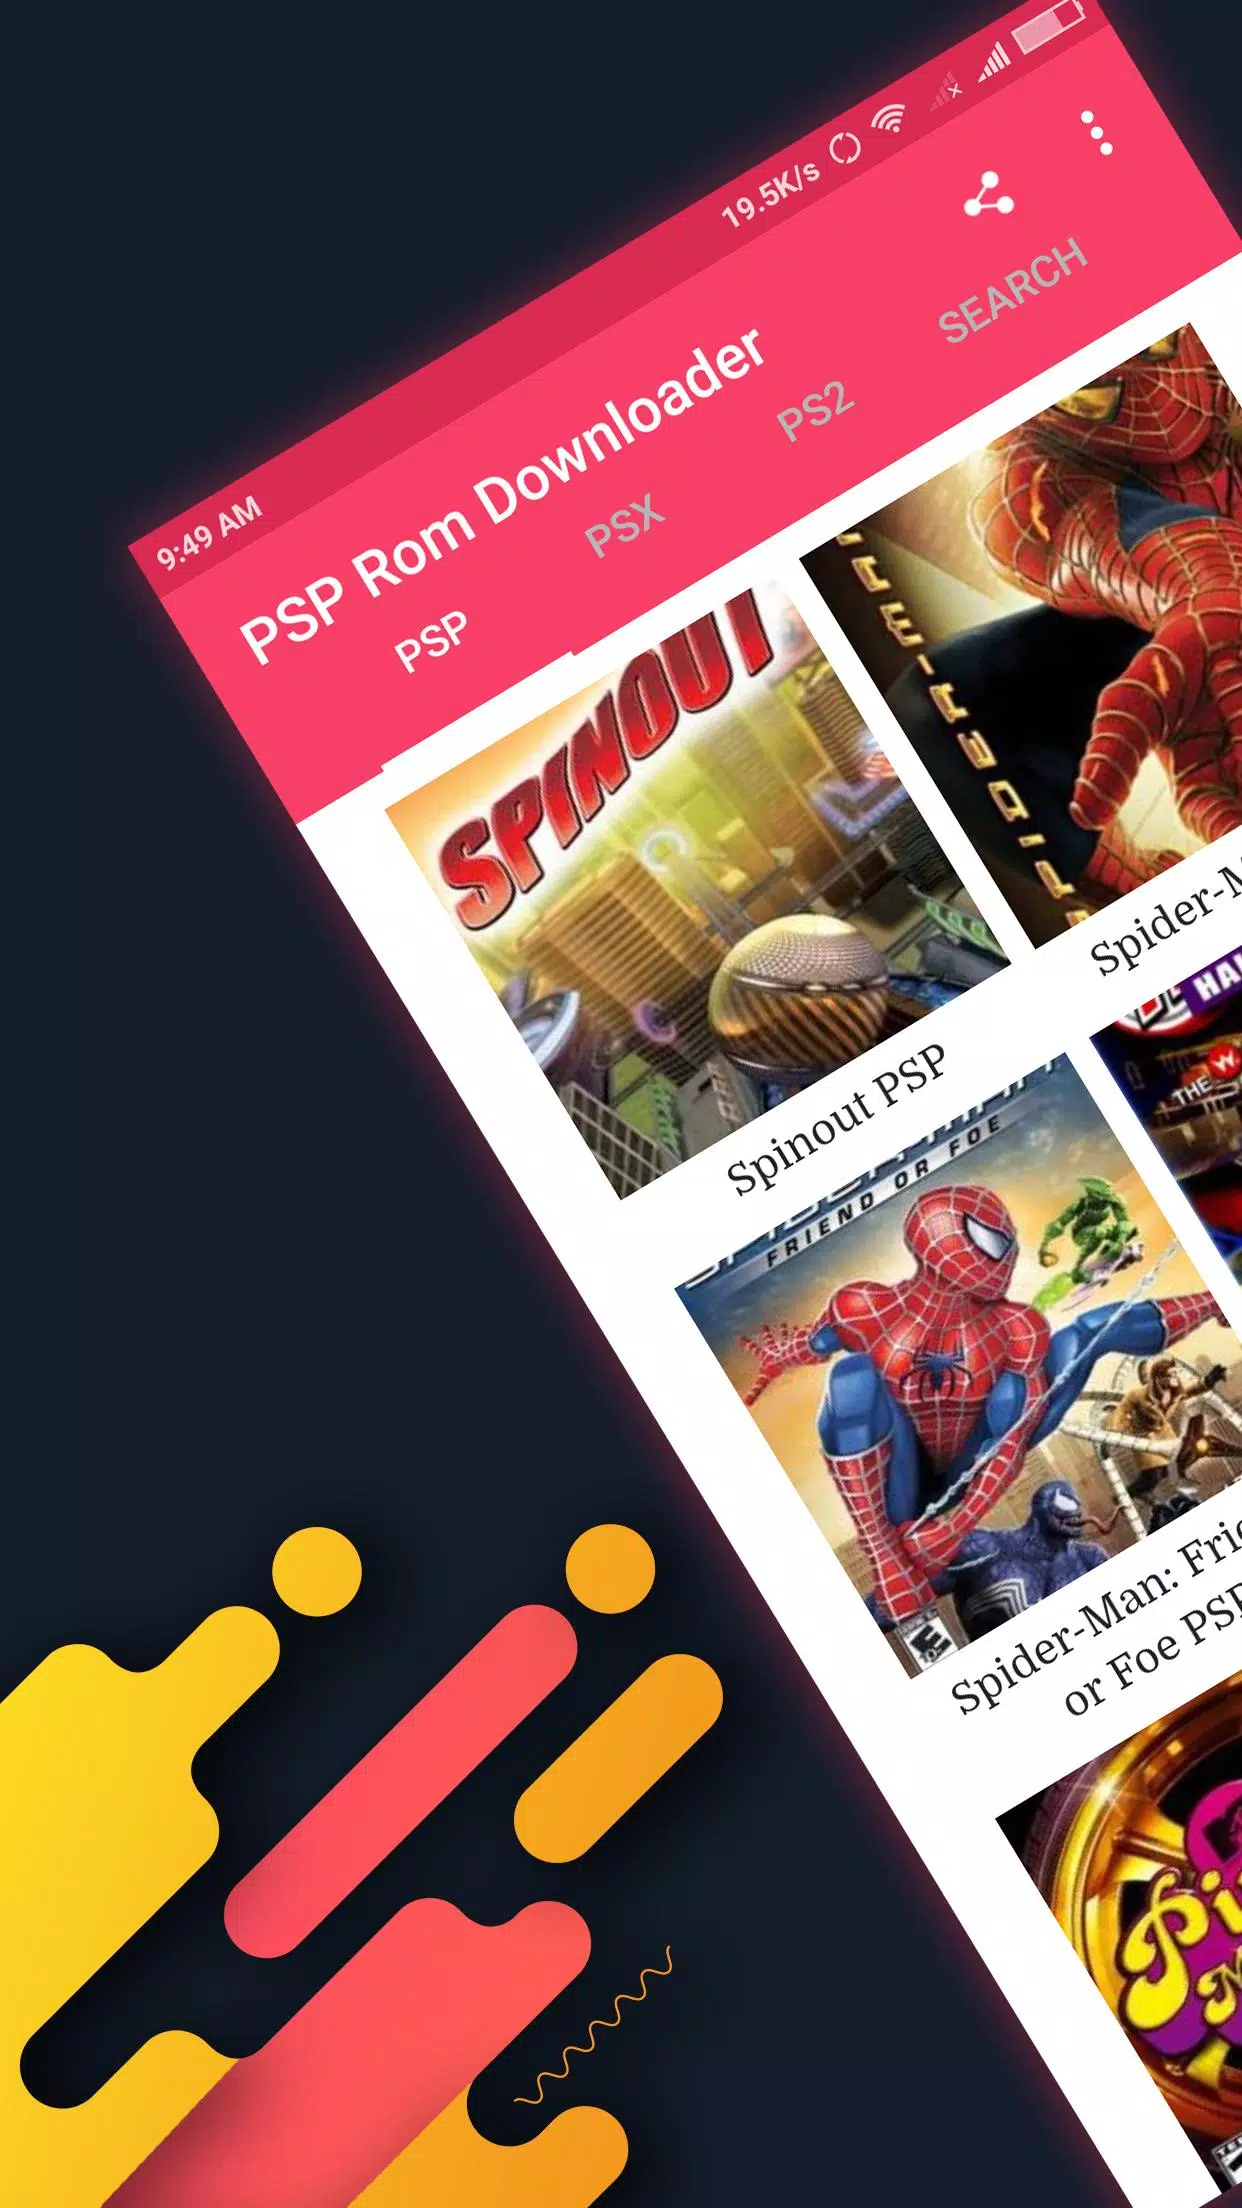 PS2 Download: Emulator & Games APK for Android Download